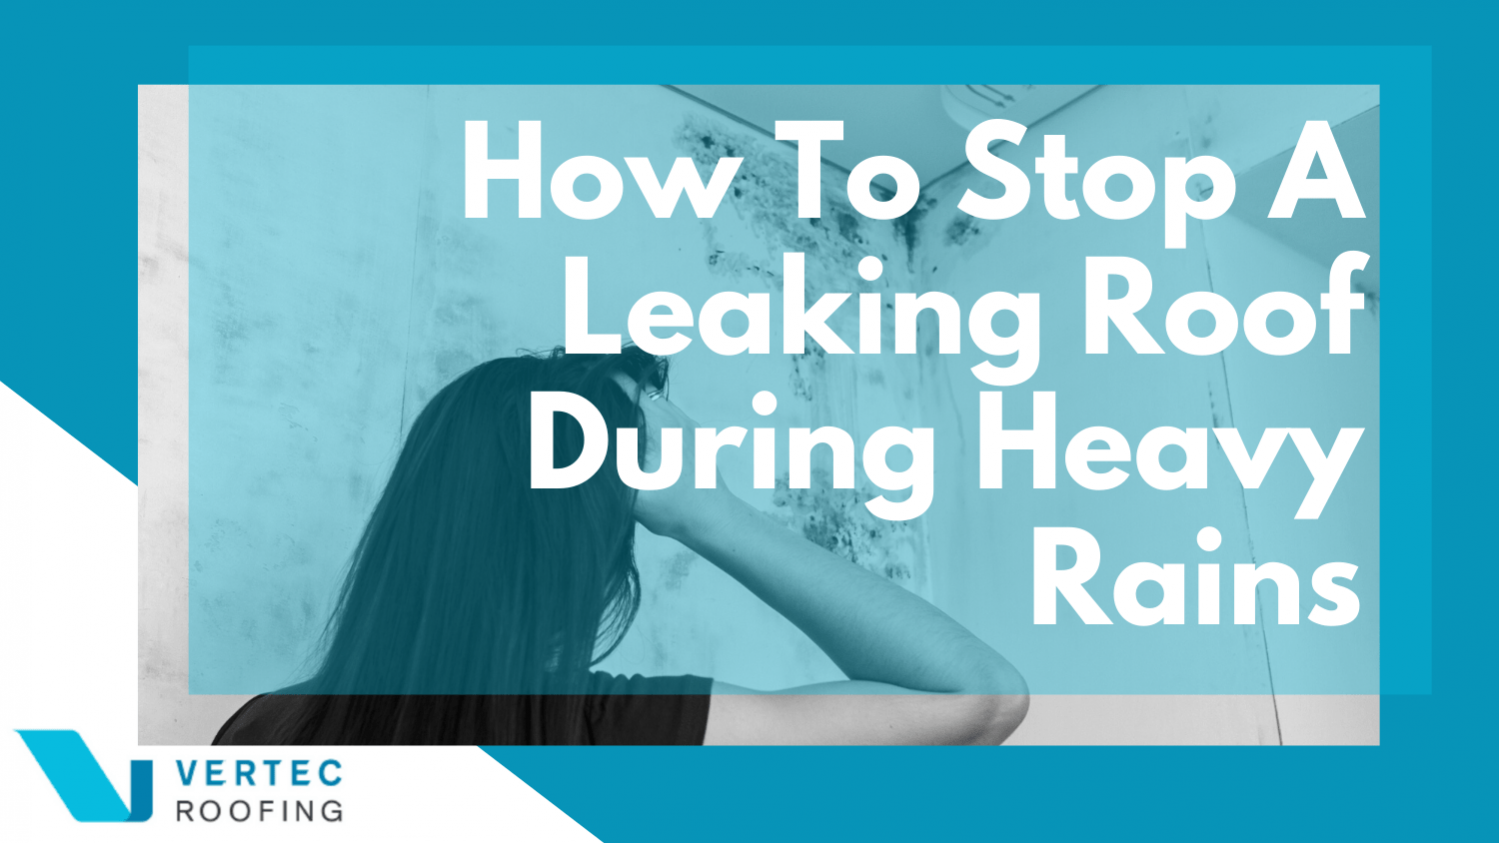 How To Stop A Leaking Roof During Heavy Rains